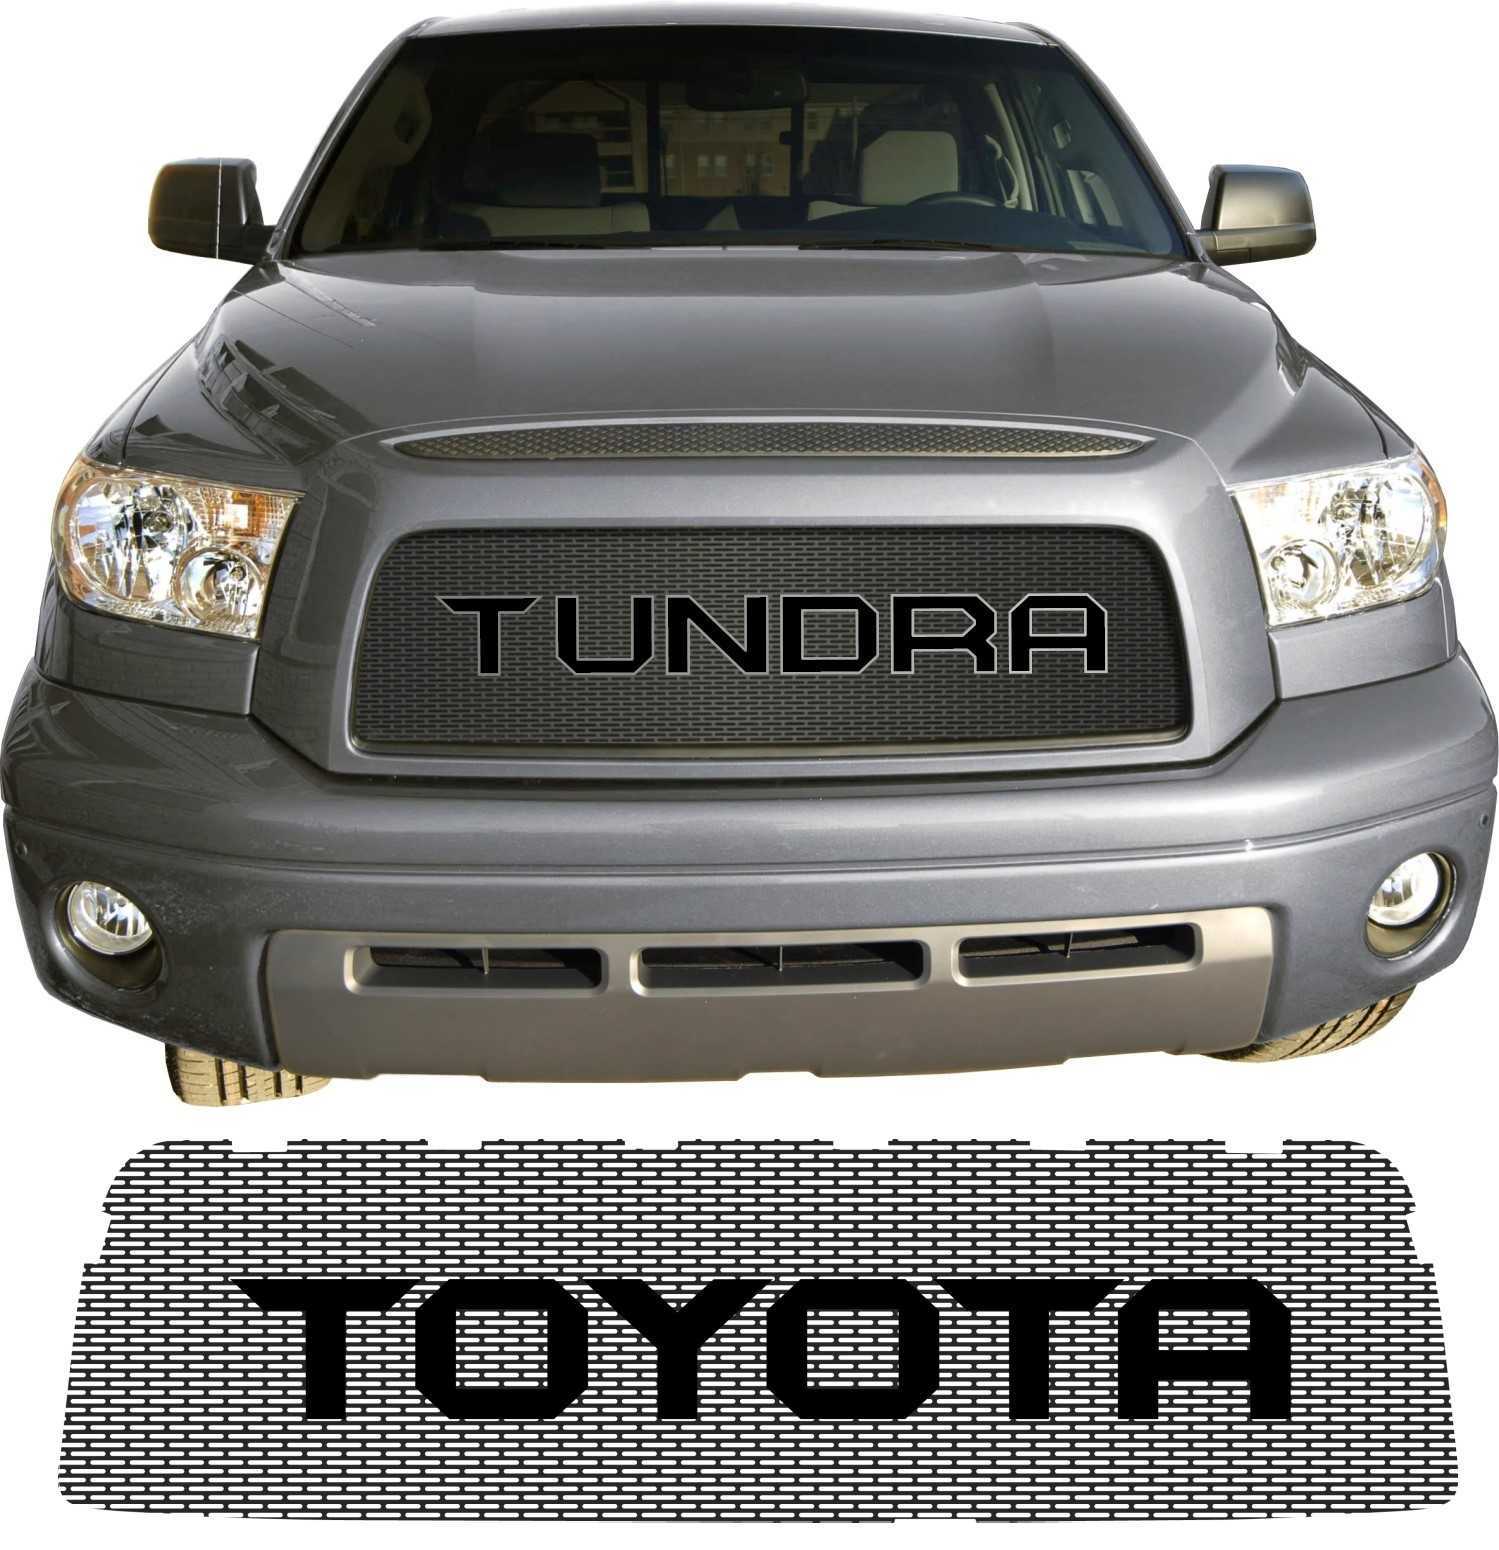 2007-09 Toyota Tundra Grill Mesh with Big Letters by customcargrills